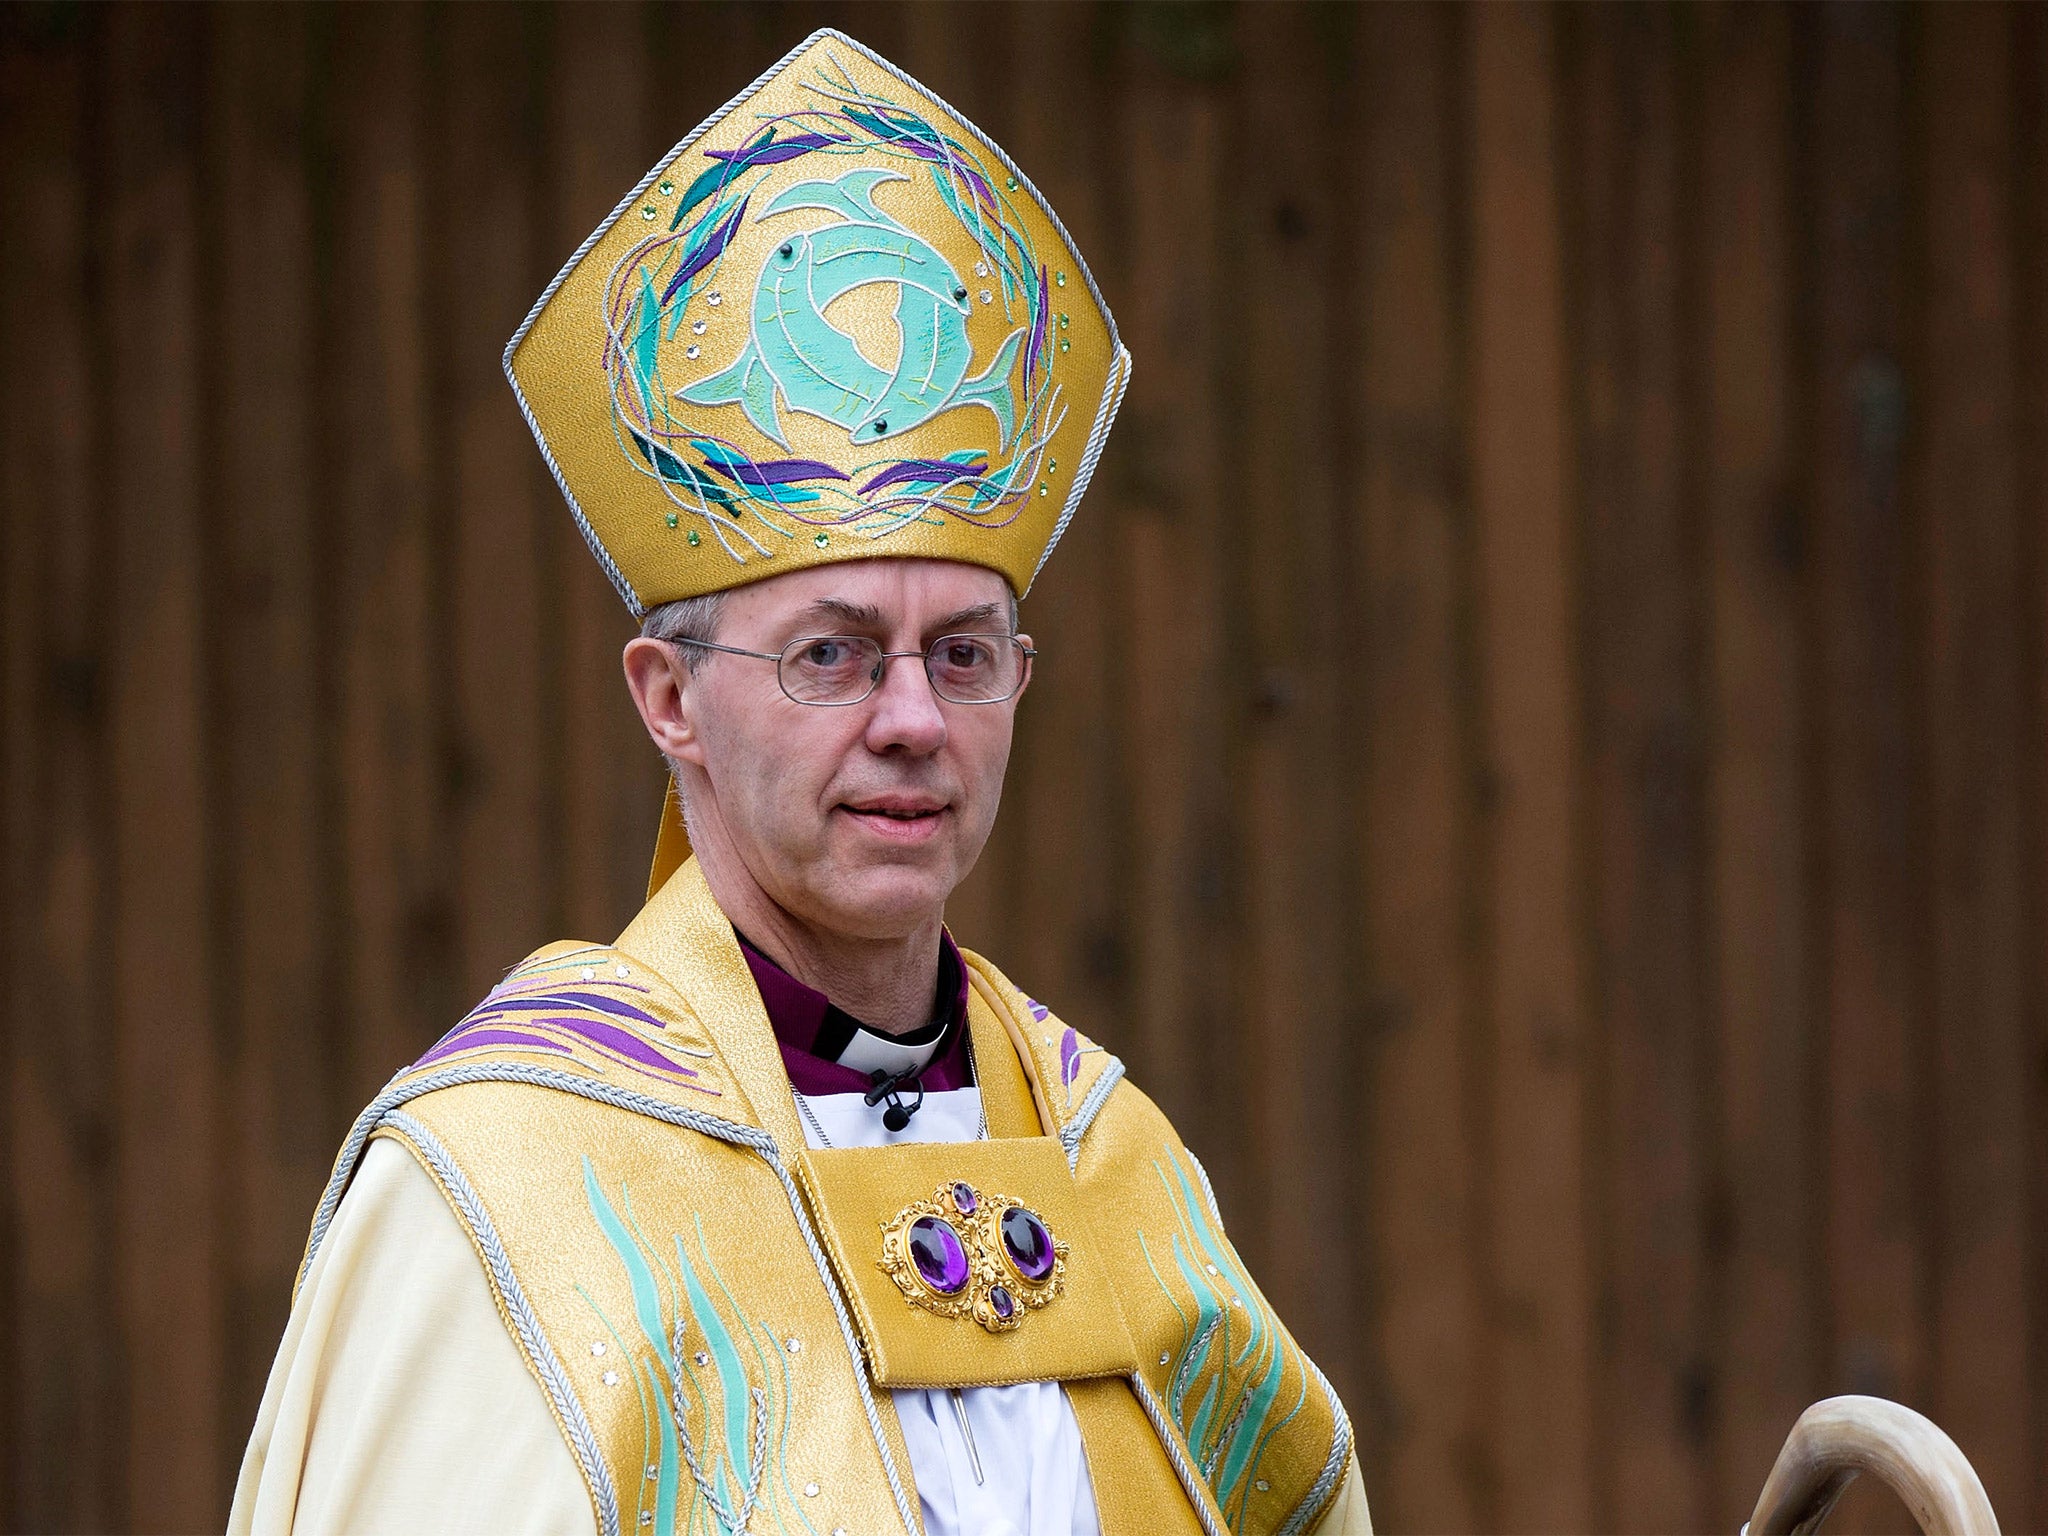 The Archbishop of Canterbury is breaking ties with the Travellers Club in Pall Mall